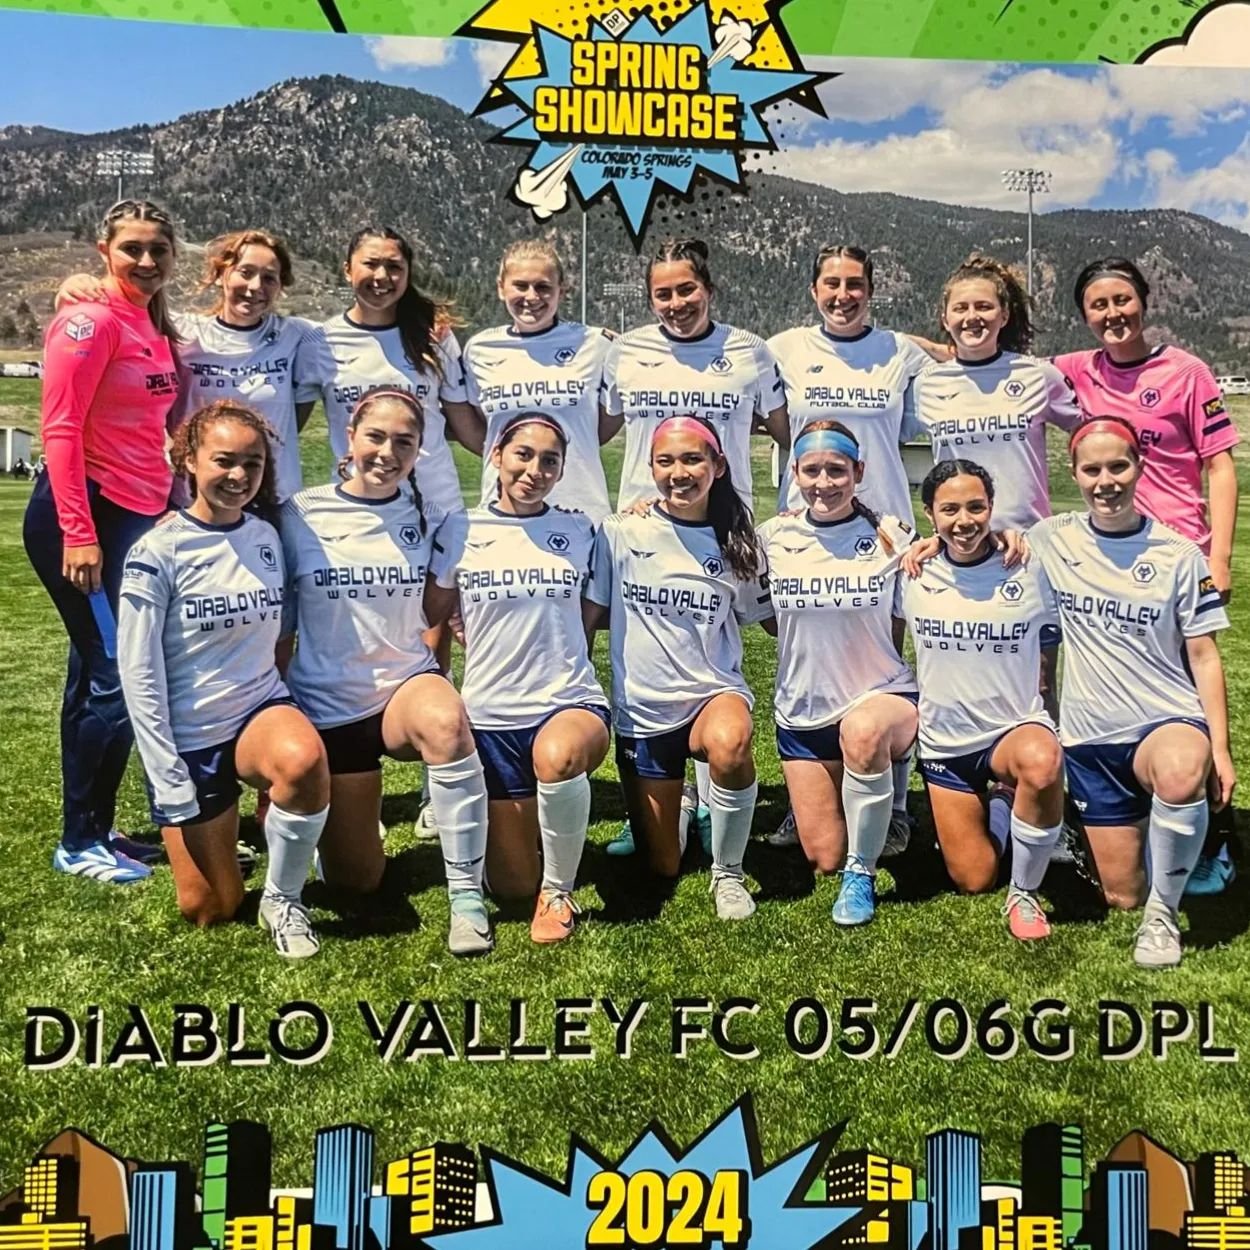 On fire with DVFC 05/06G @dp_league ! Won all 3 games and scored 12 goals while only giving up 1! Mission accomplished at the @af_academy #GoDVFC